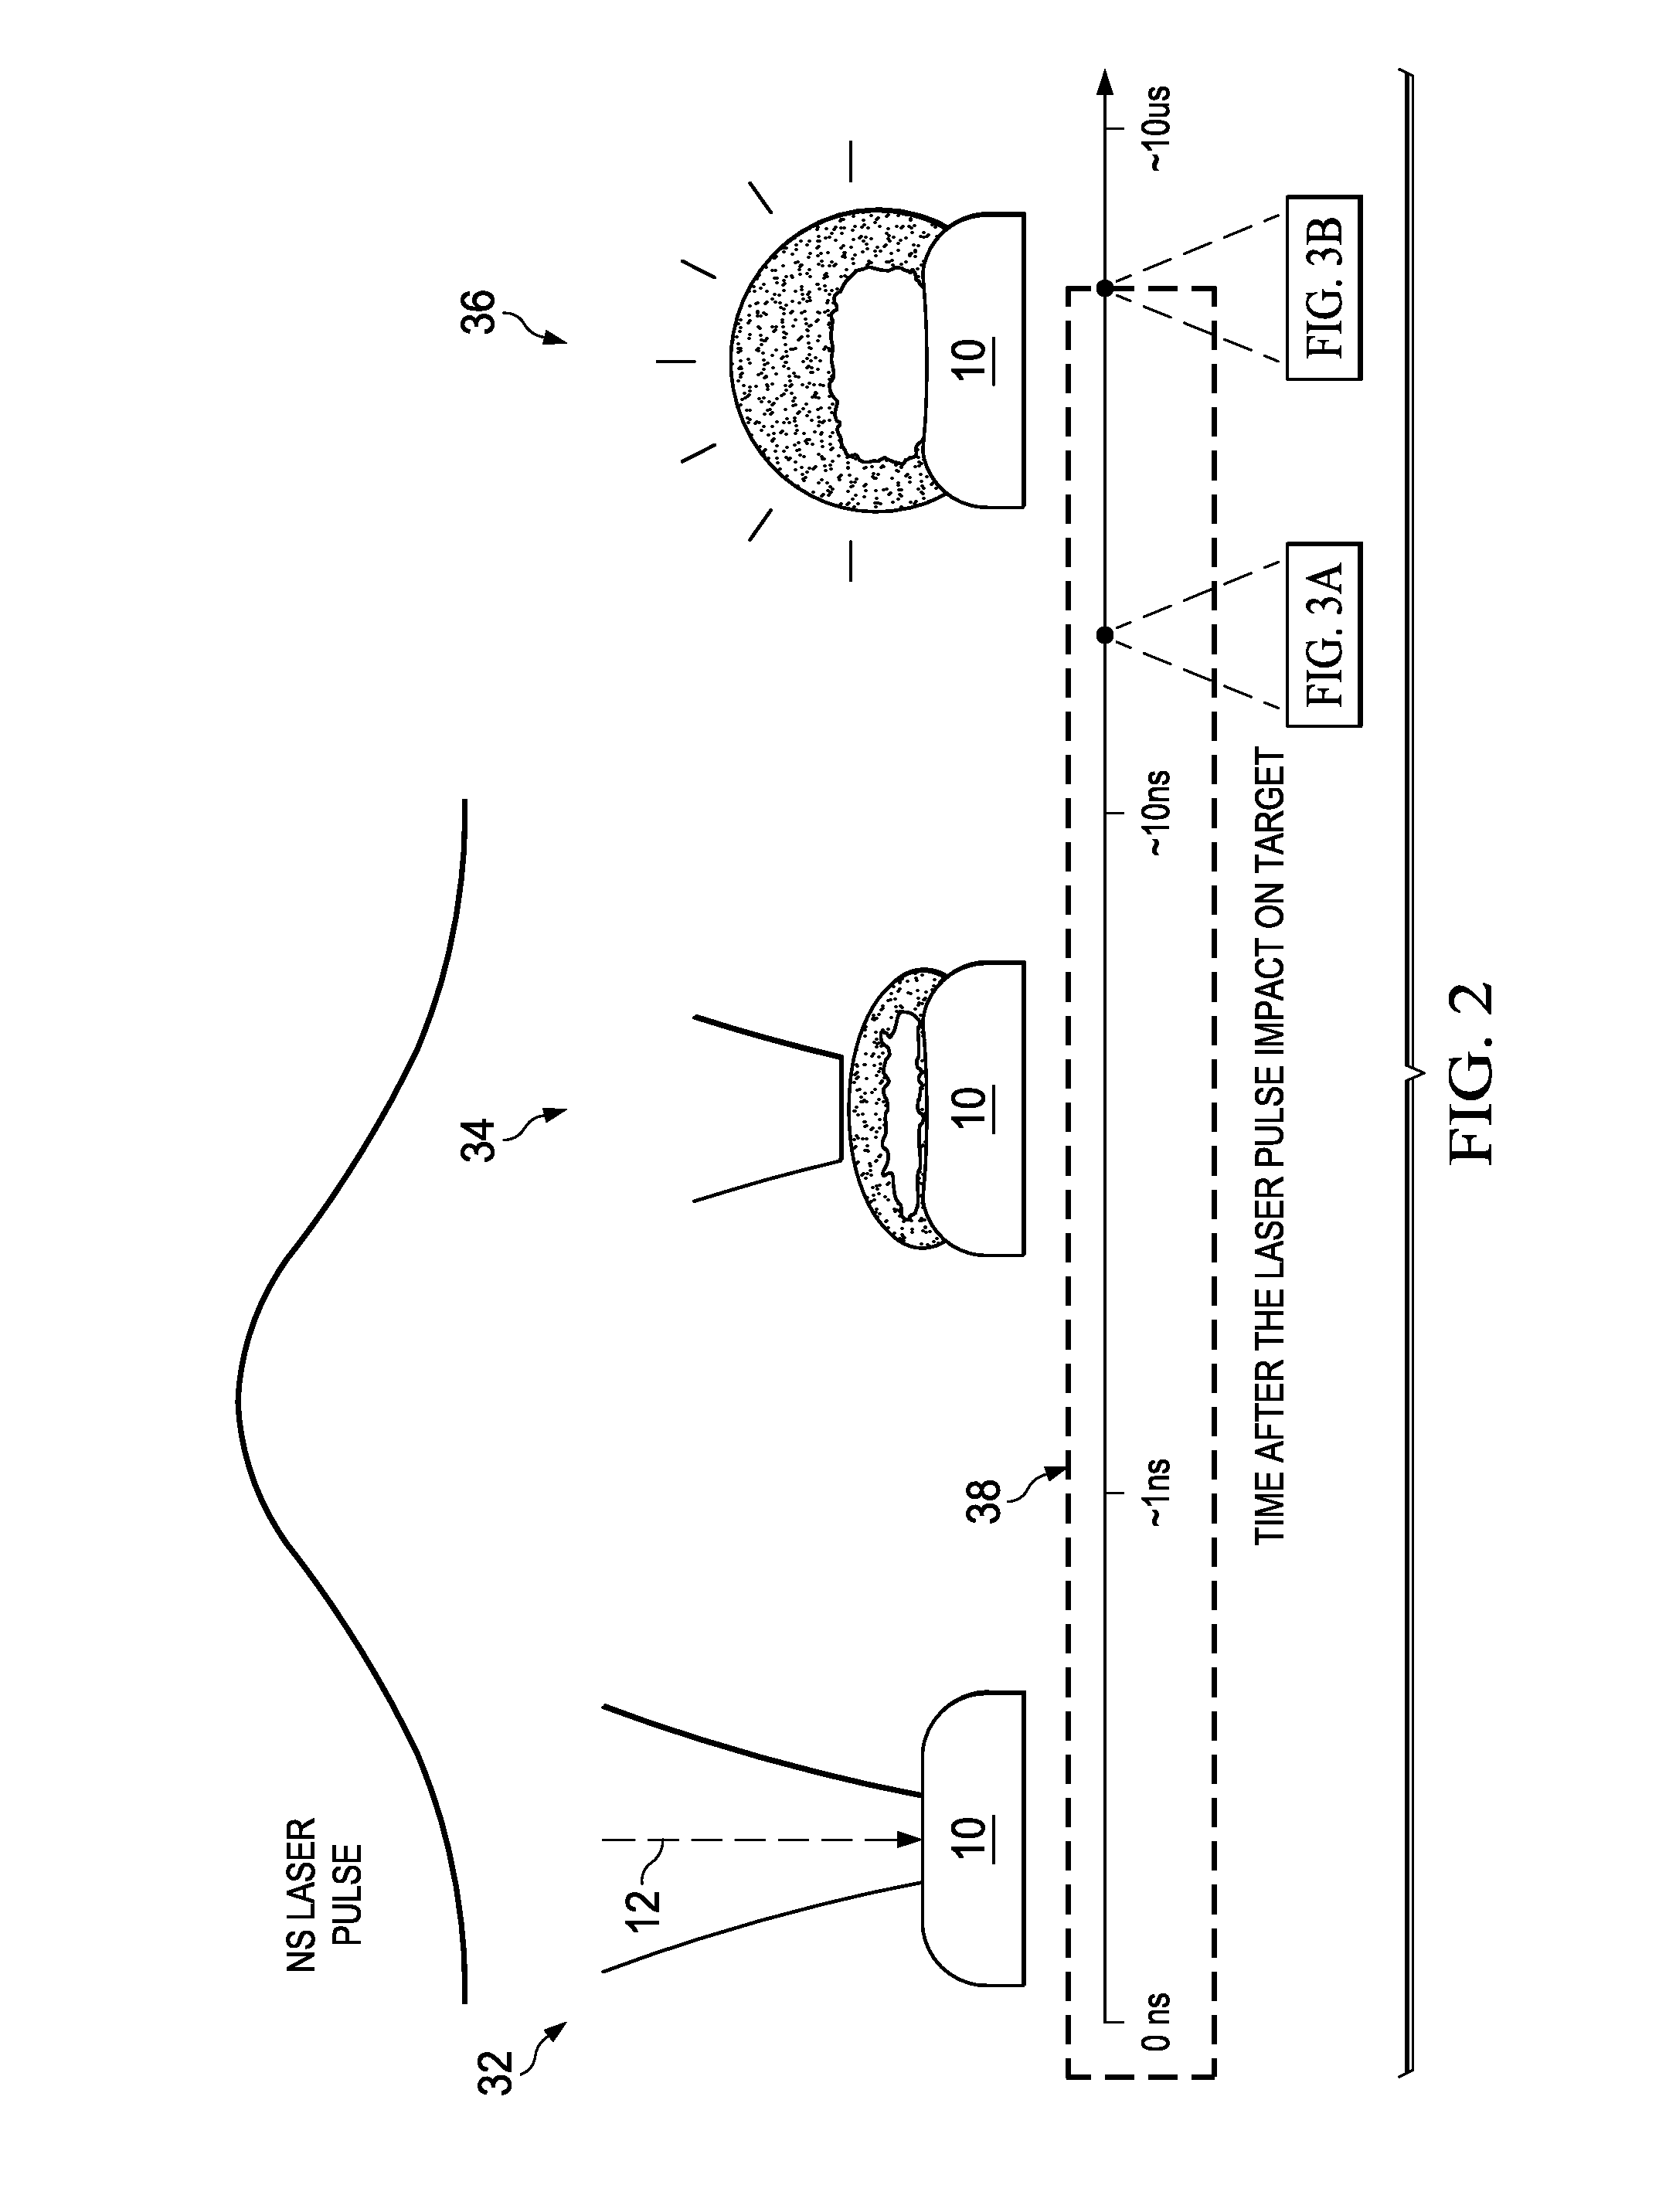 Method for Elemental Analysis of a Snack Food Product in a Dynamic Production Line